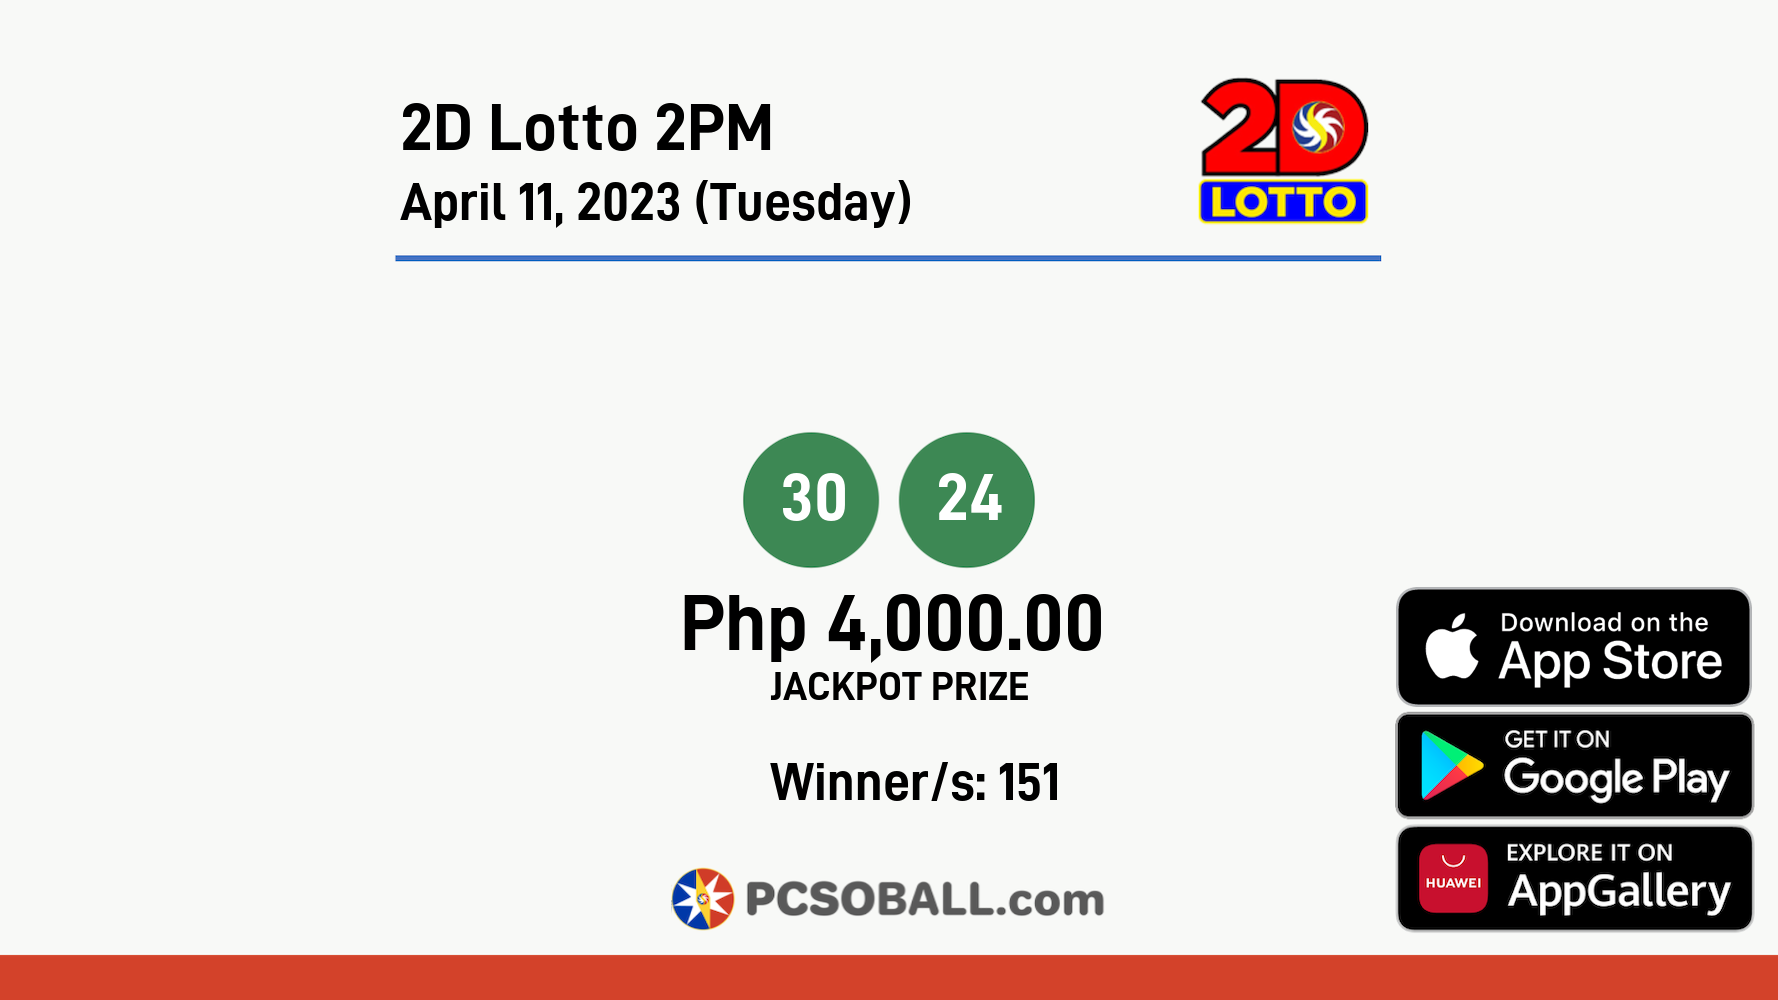 2D Lotto 2PM April 11, 2023 (Tuesday) Result